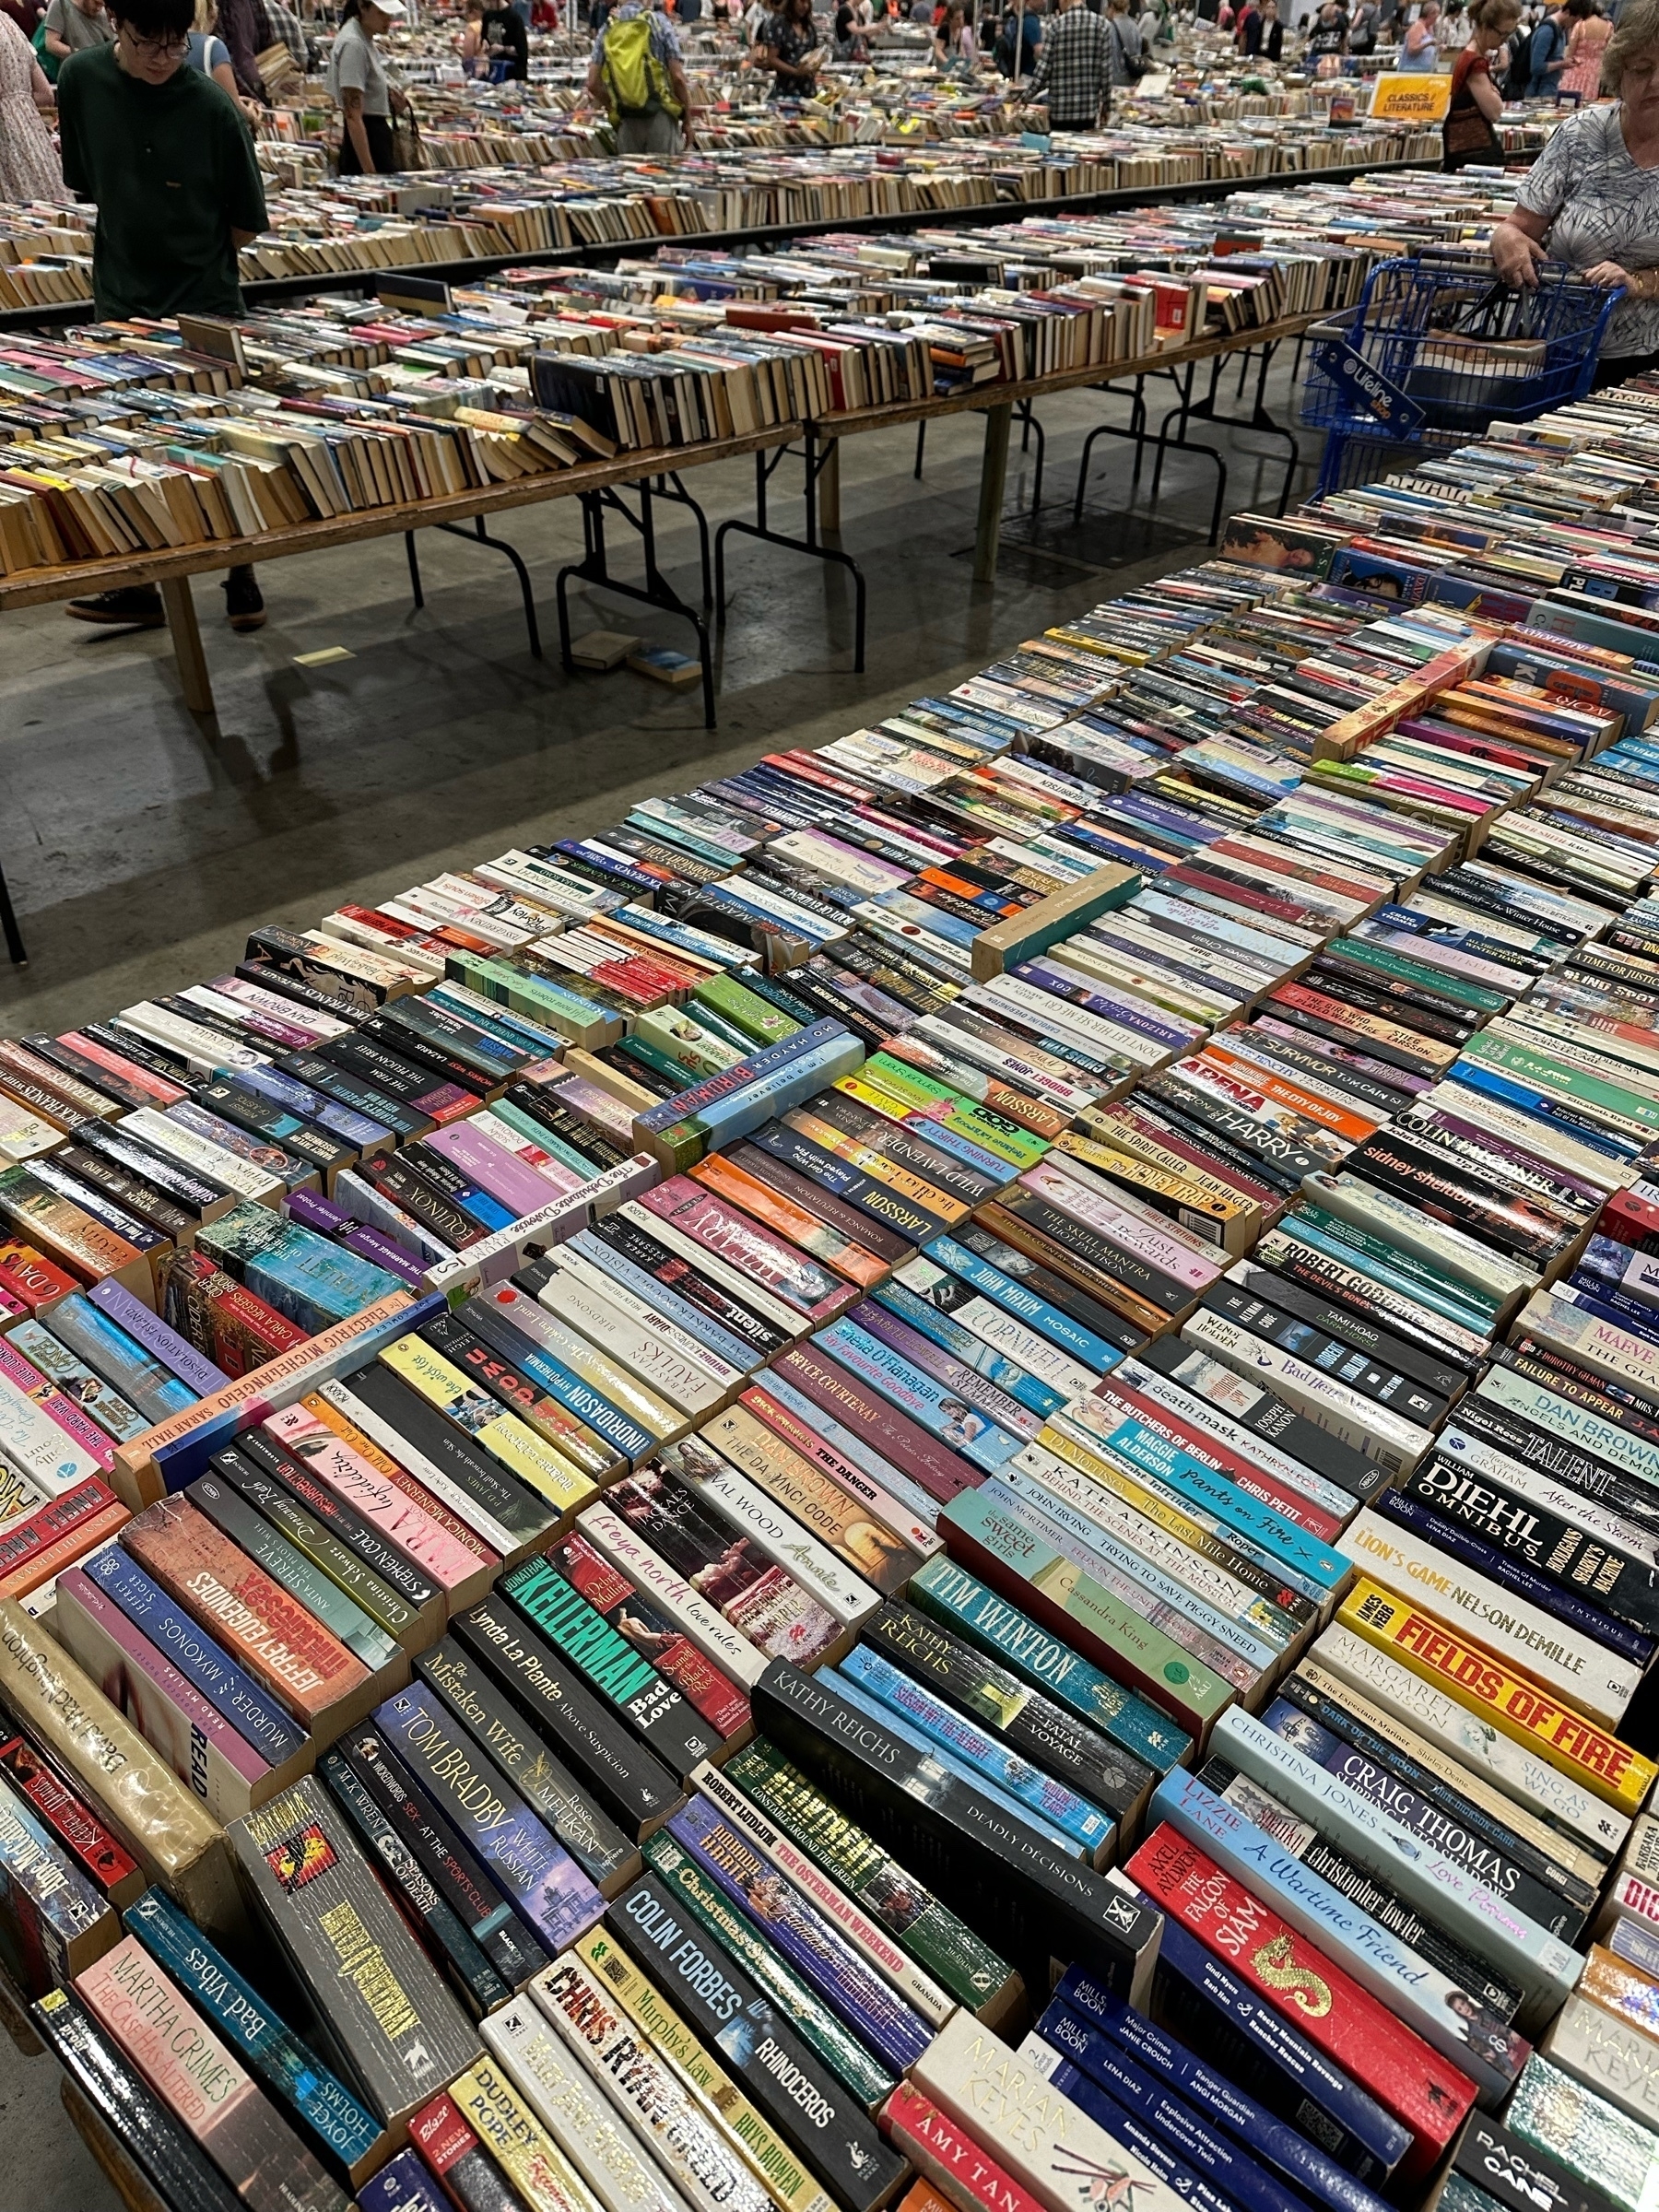 Looking across a hall. Second hand books stacked along trestle tables. Seven rows of paperback books on the table at the front of the photo. Multiple trestle tables stacked similarly in the background.